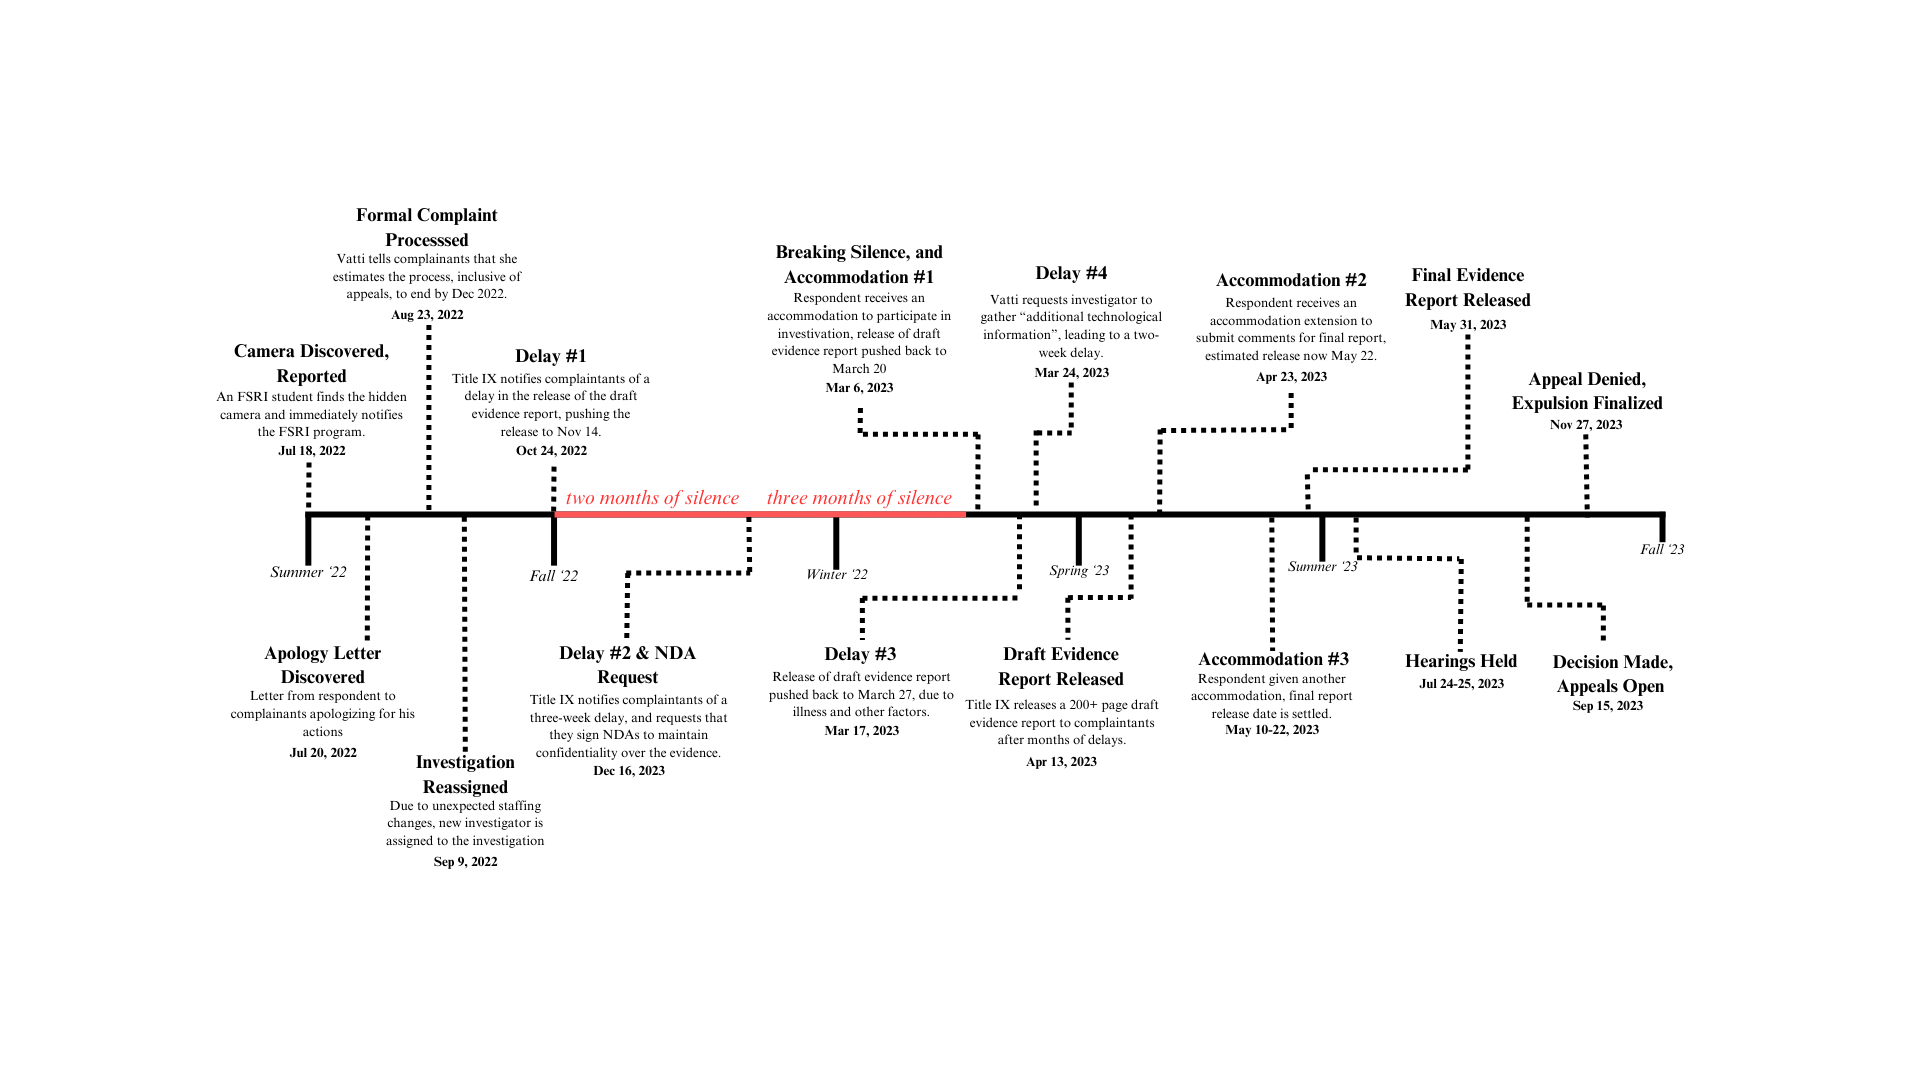 A visual timeline of the investigation